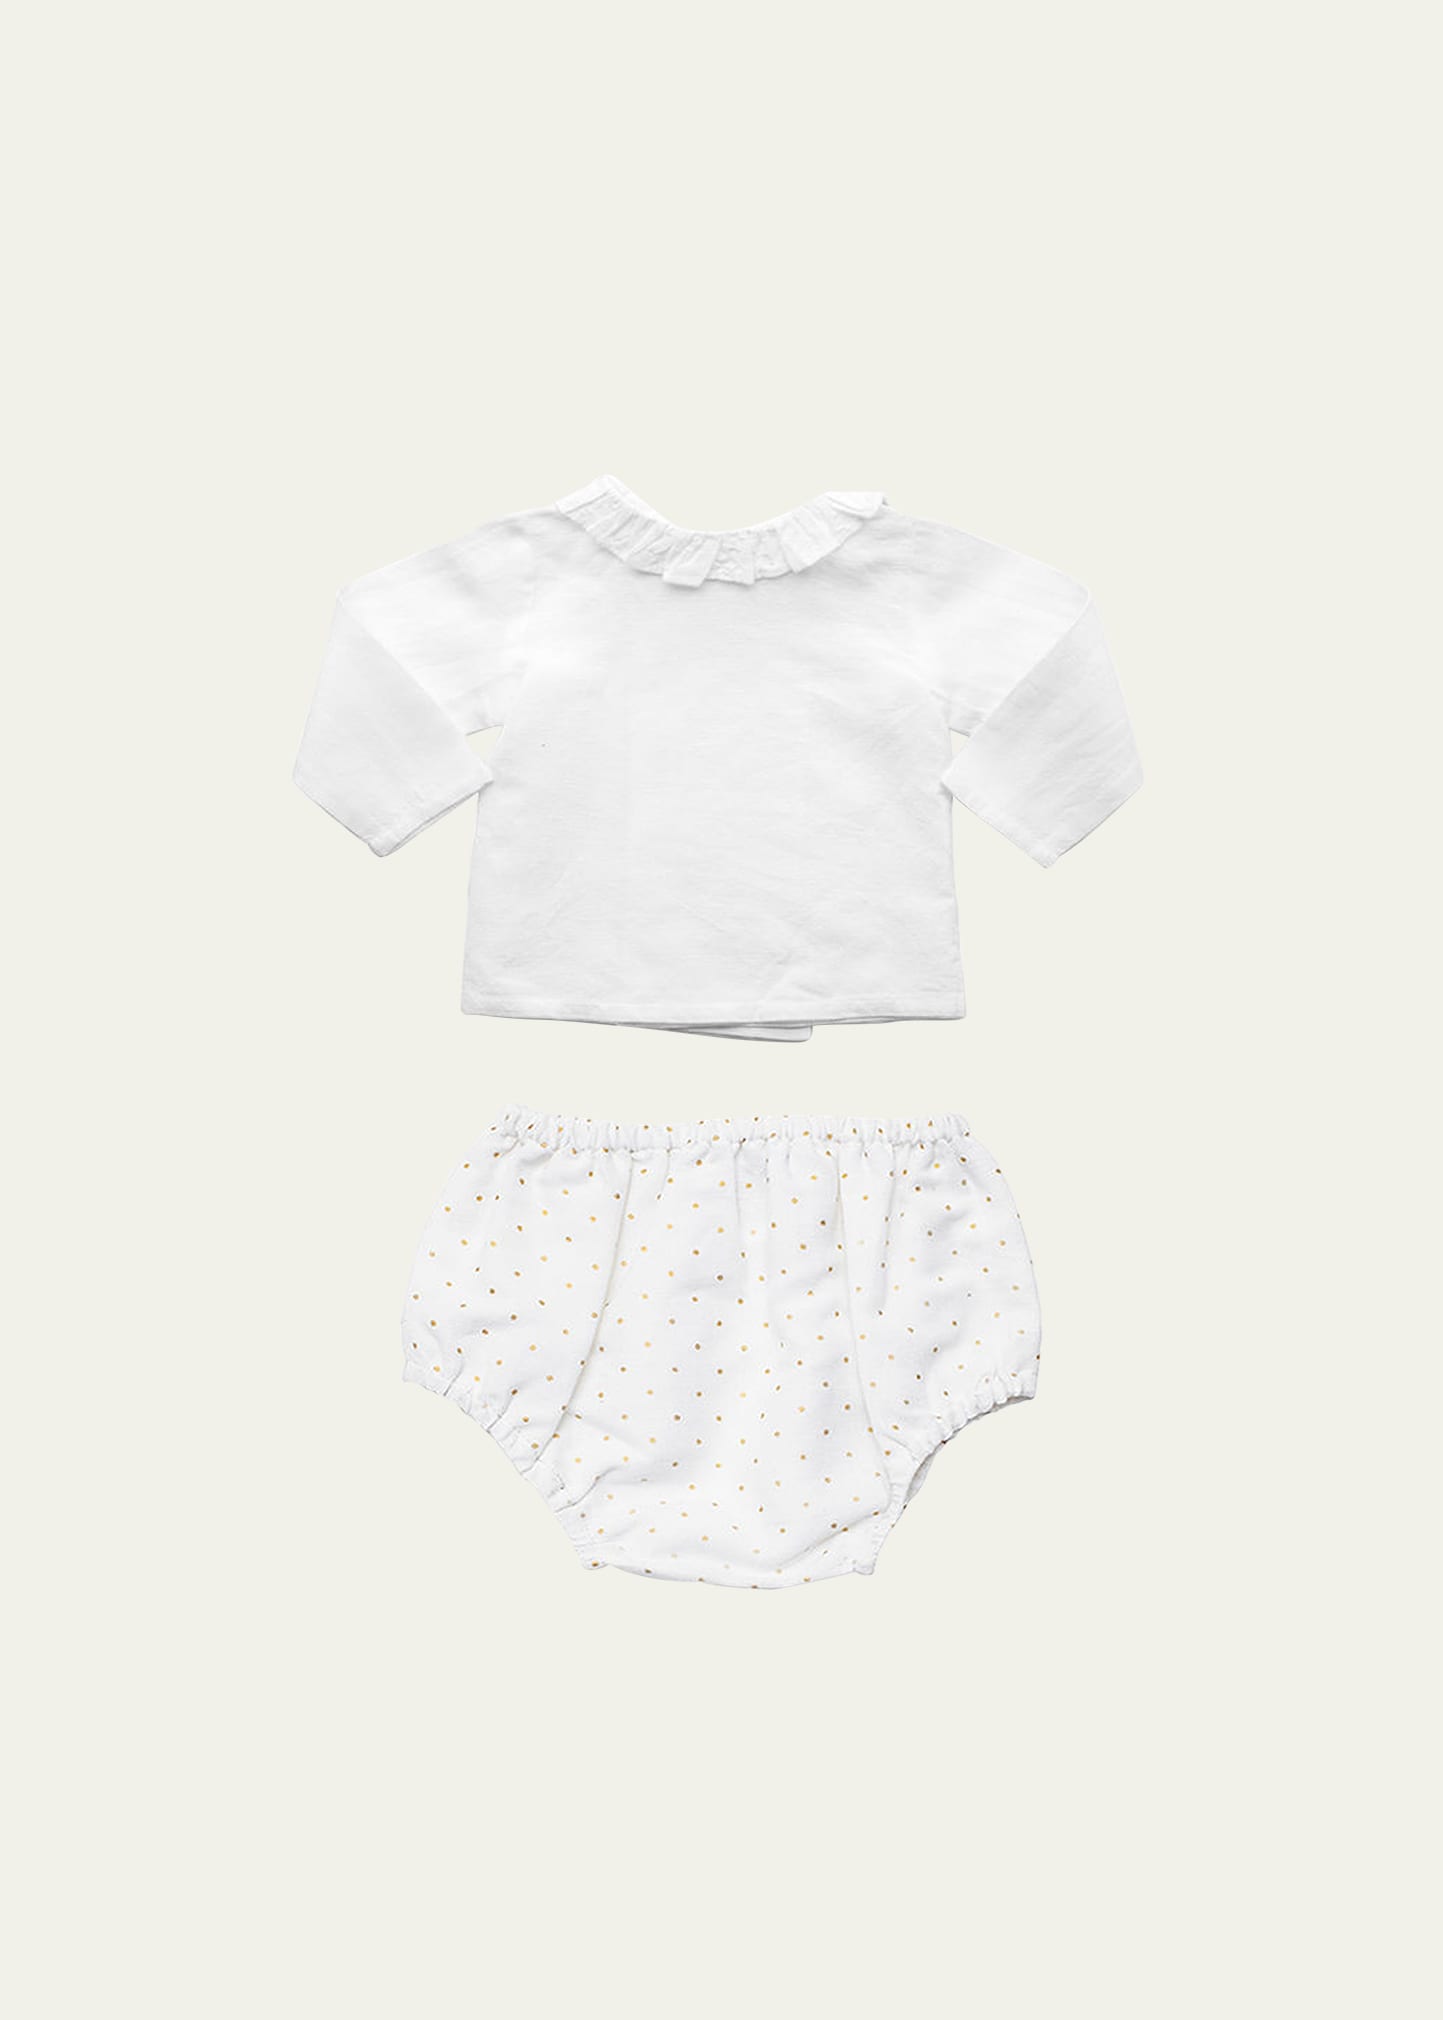 Louelle Girl's Top W/ Bloomers 2-Piece Gift Set, Size Newborn-24M